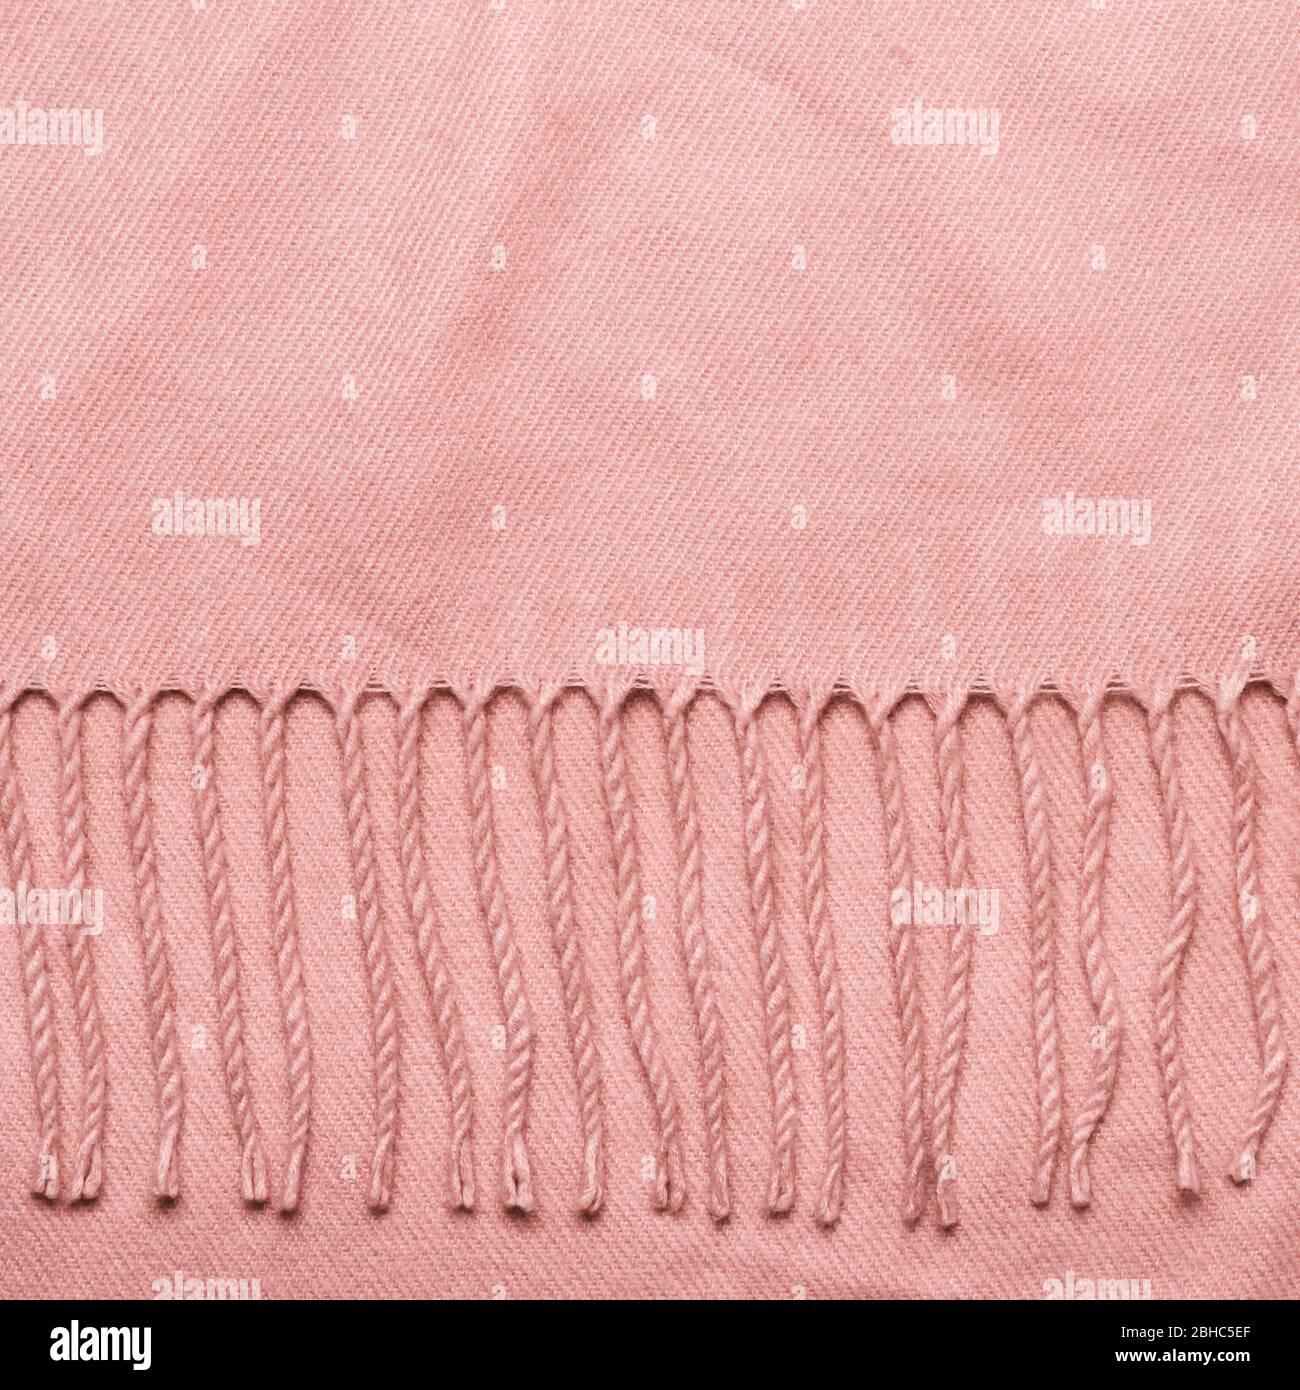 Cozy soft fabric background with copy space. Pink plaid with tassels. Stock Photo